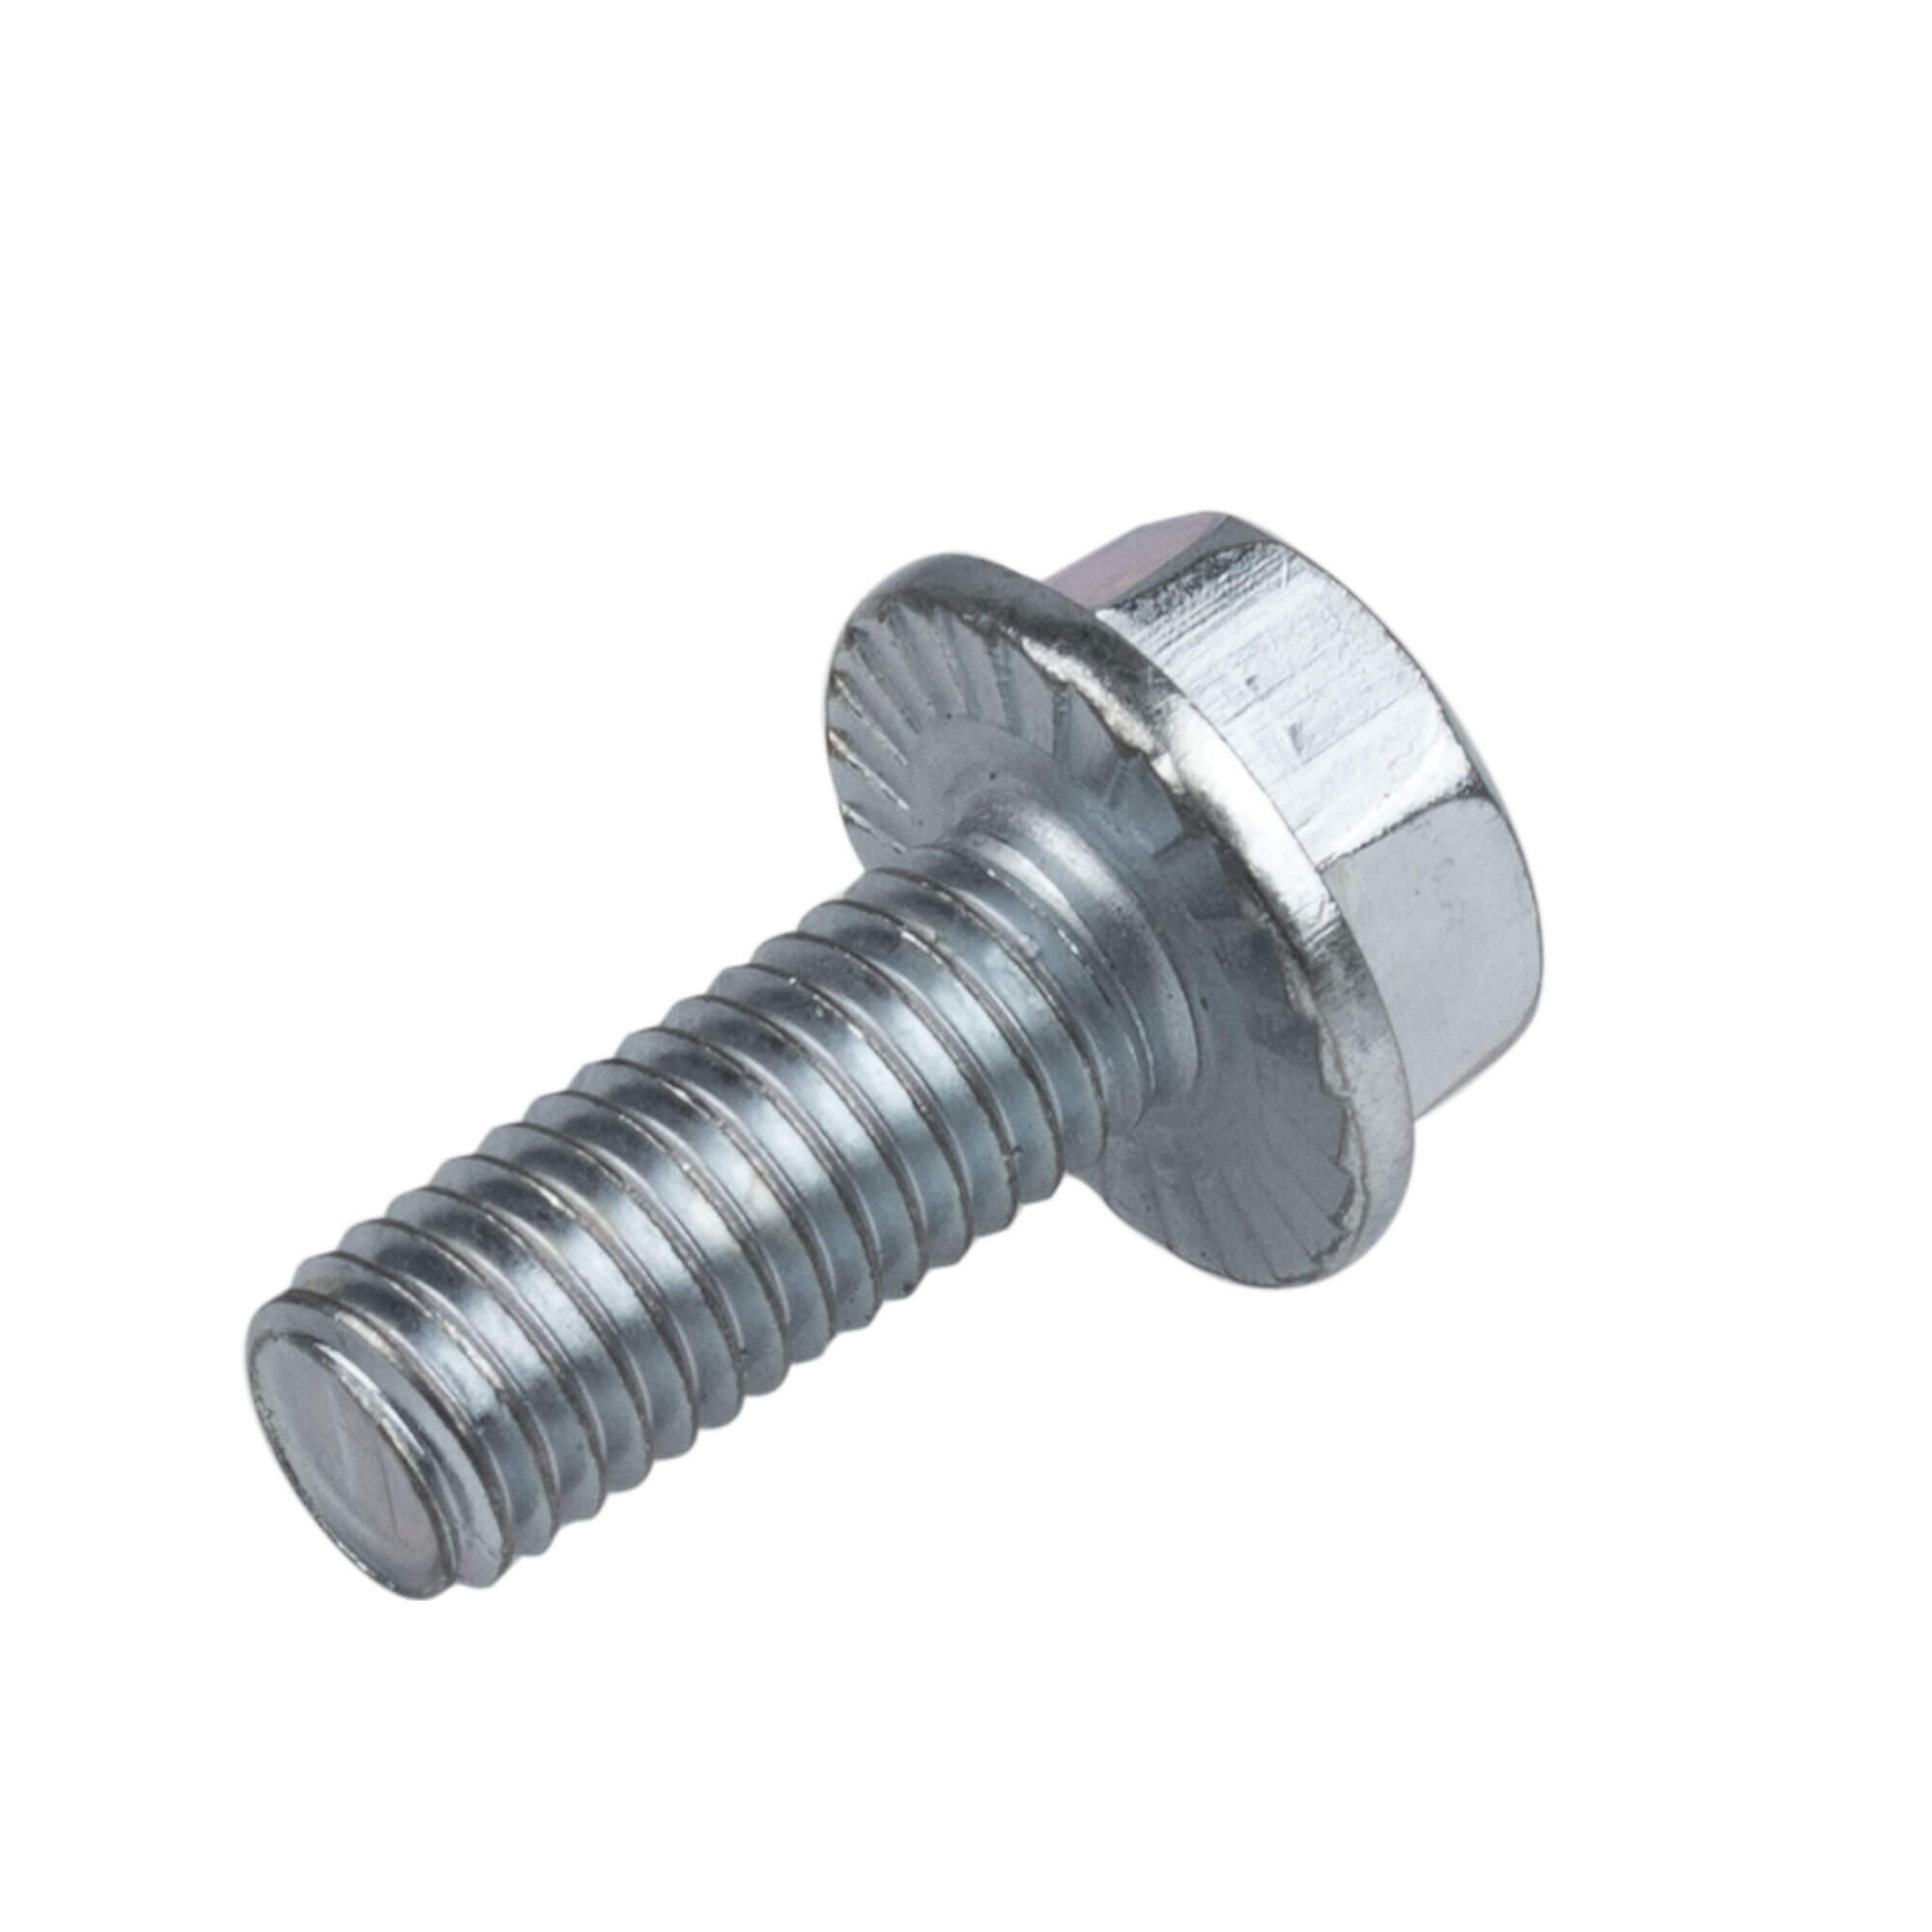 M8x20 bolt with flange - spare part for Cancan manual juicer